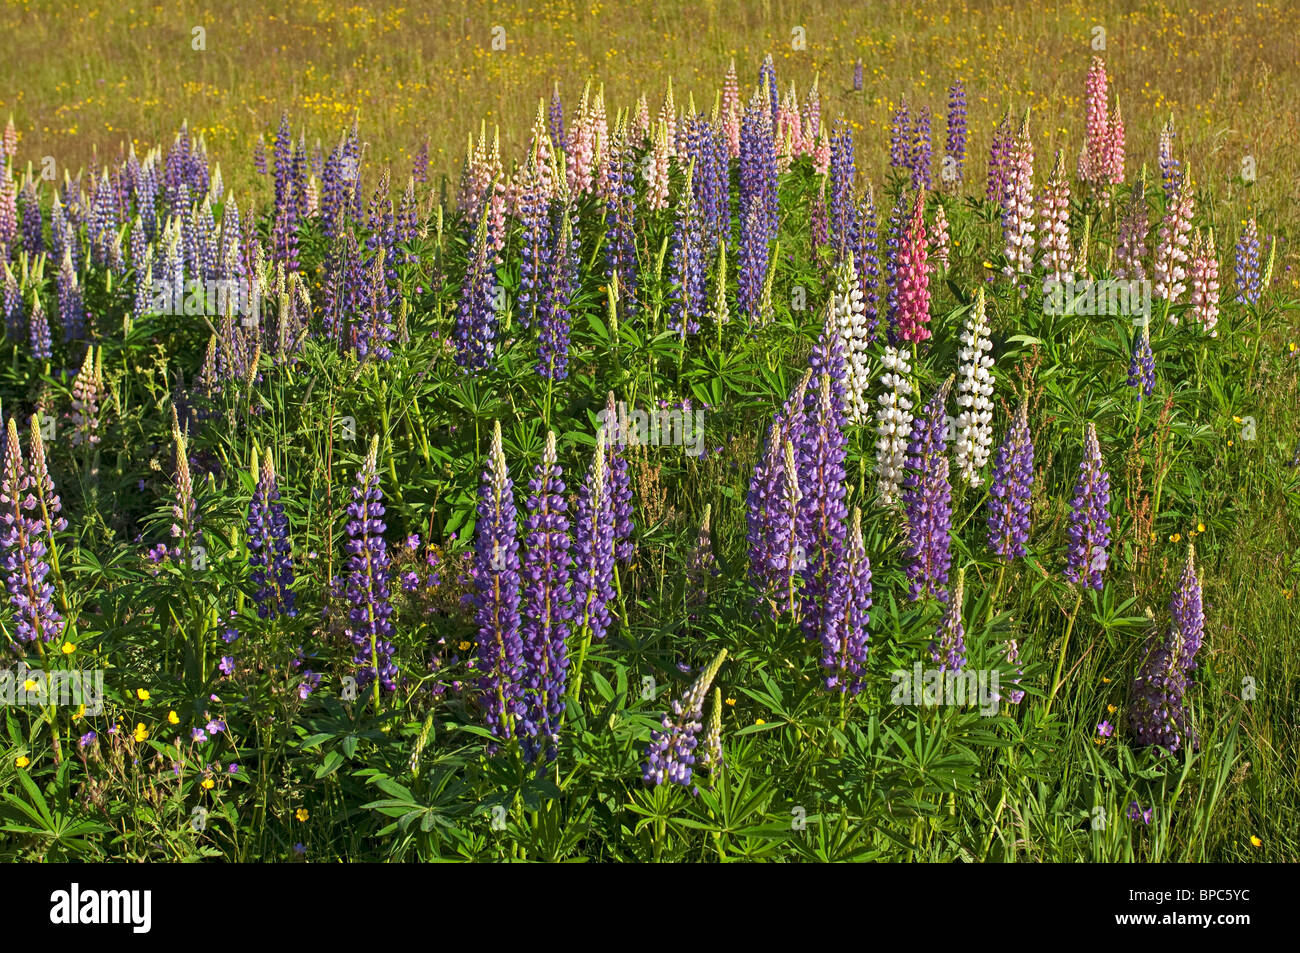 Garden Lupin (Lupinus polyphyllus), flowering stand in Sweden. Stock Photo